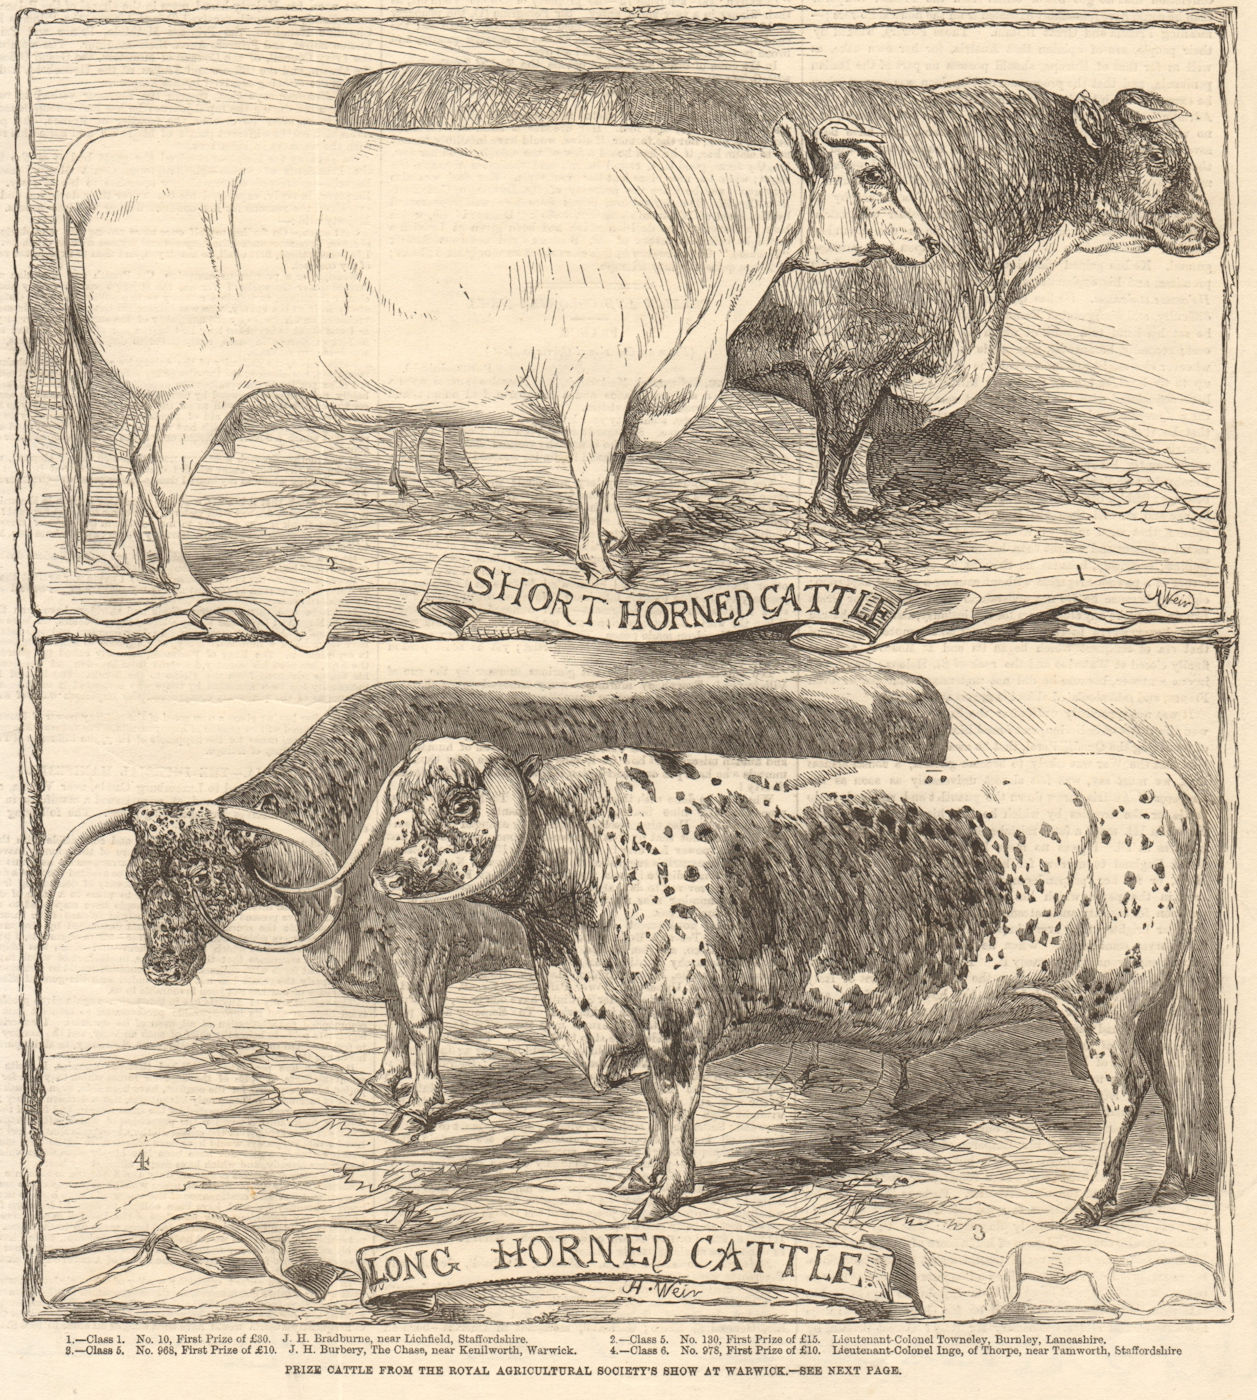 Associate Product Prize cattle, Royal Agricultural Society's show at Warwick. Warwickshire 1859